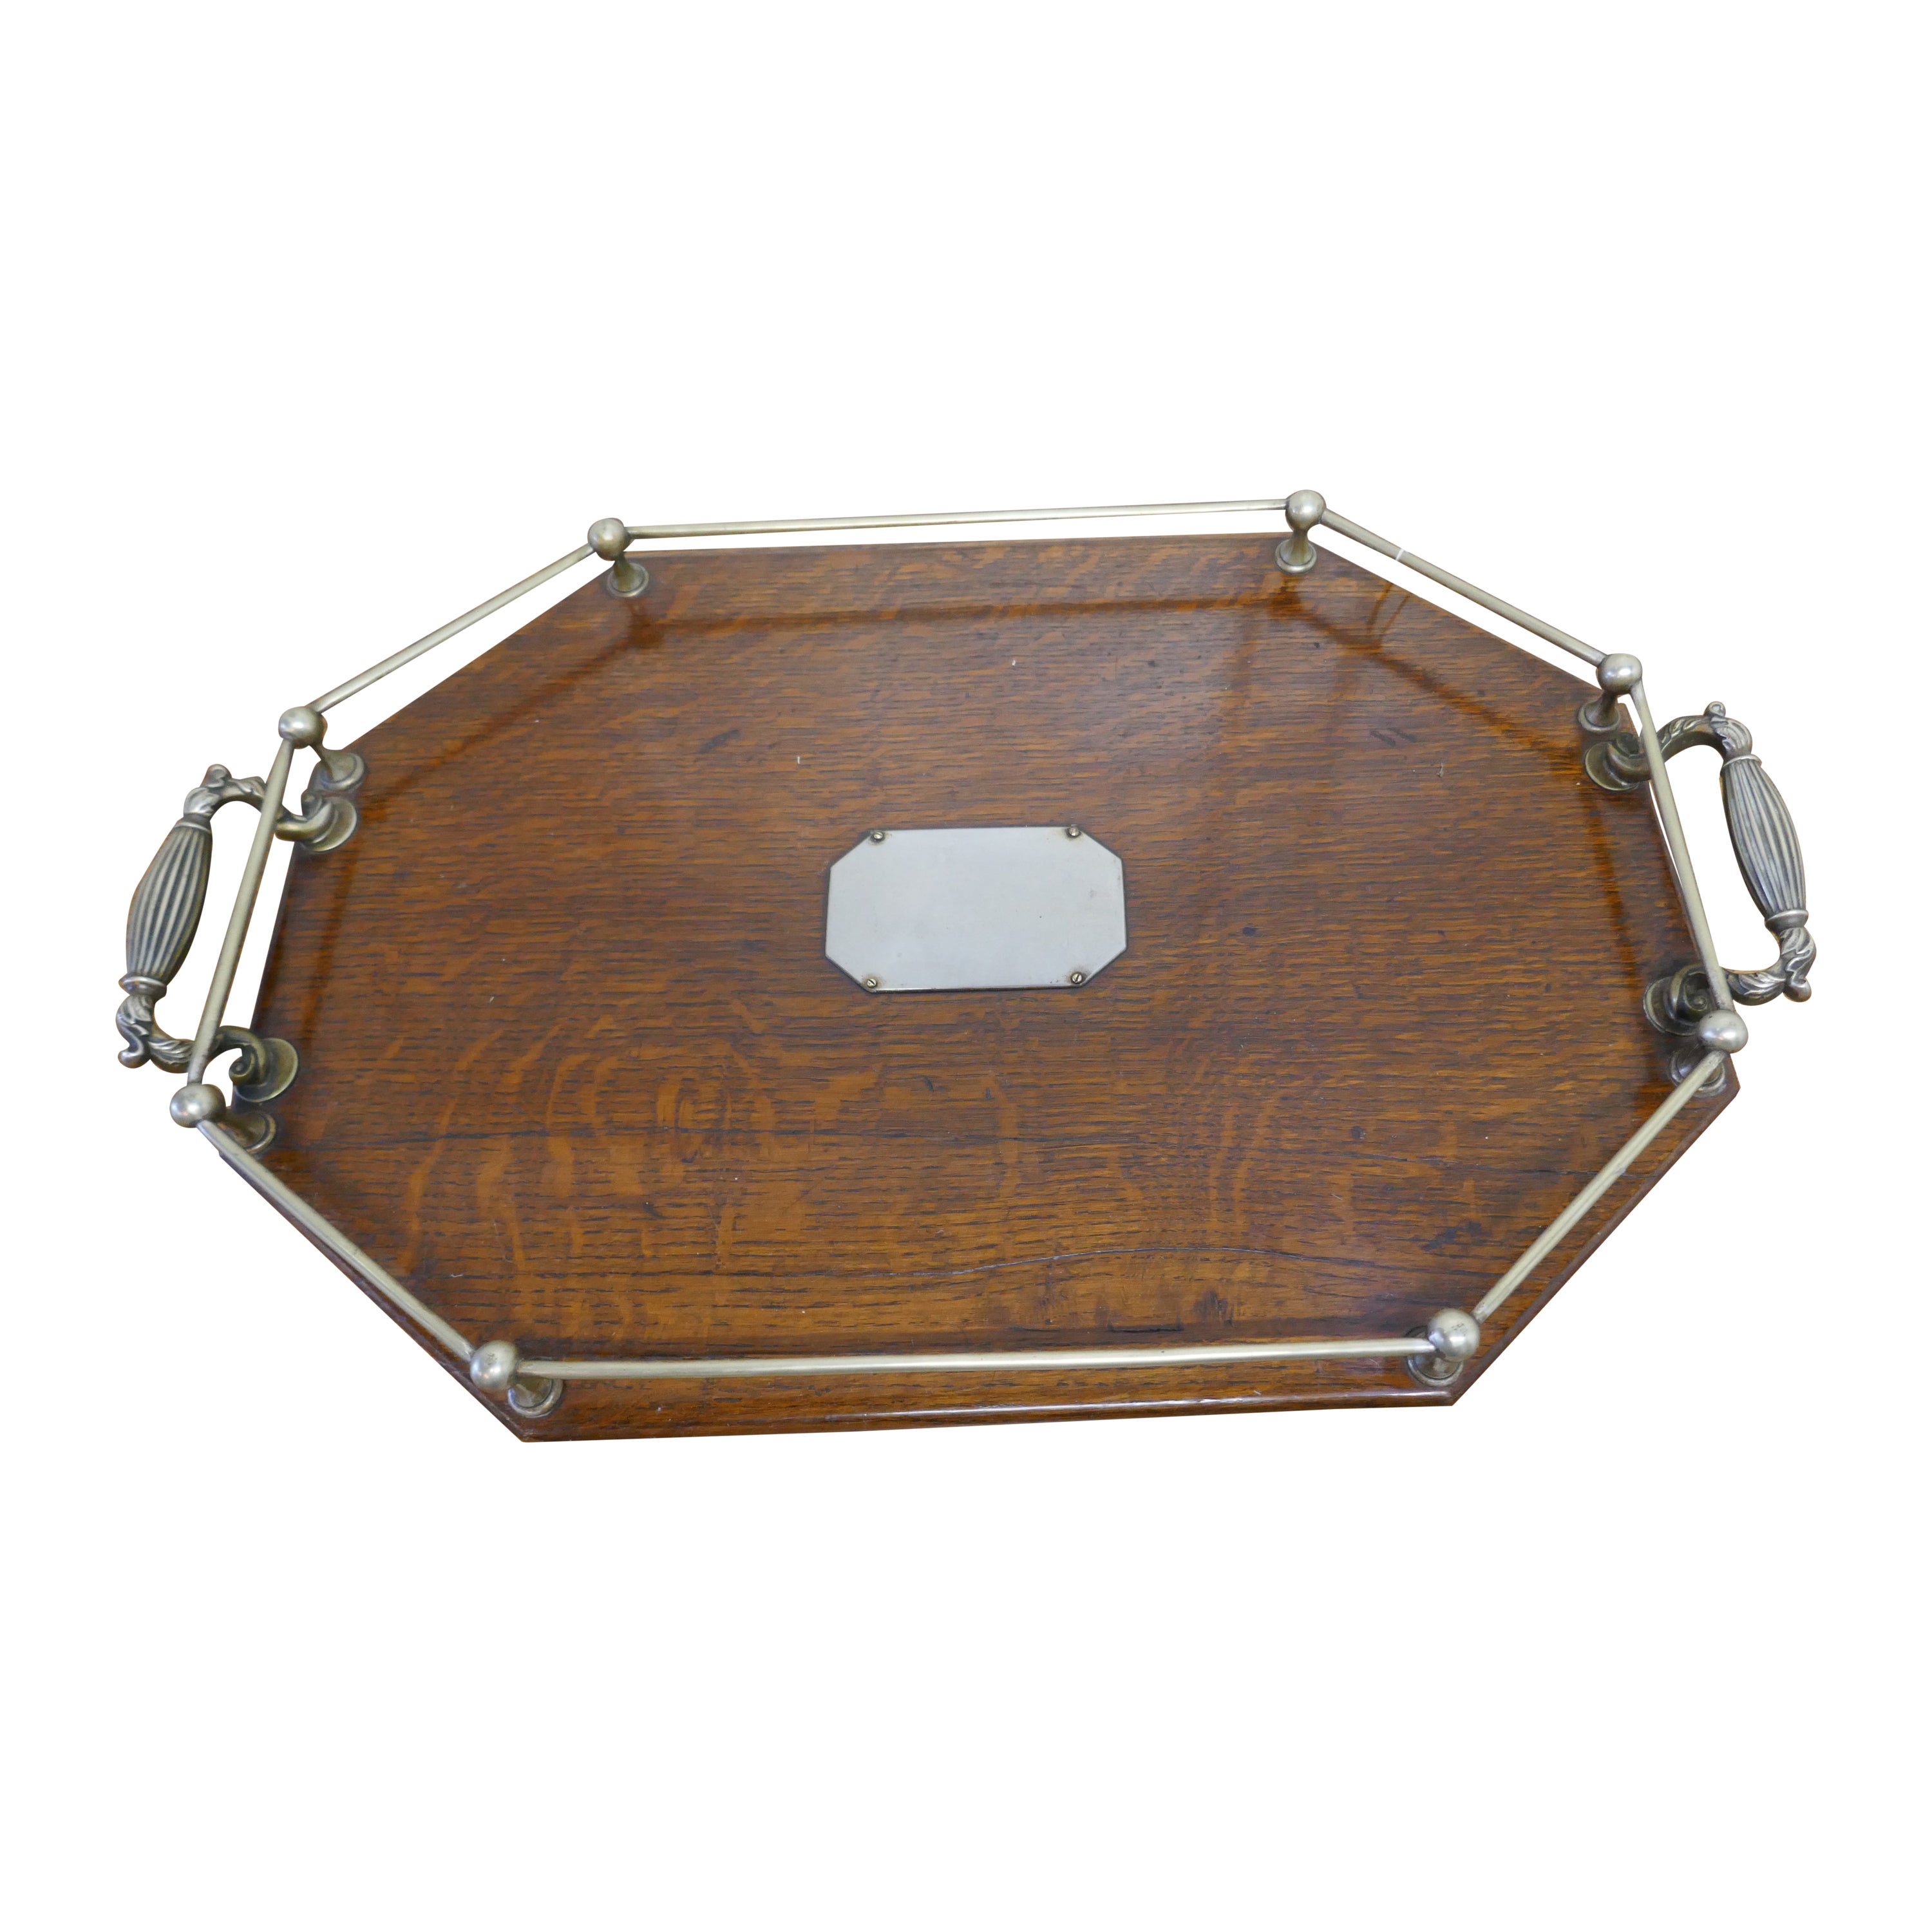 Octagonal Oak and Silver Plated Drinks Tray